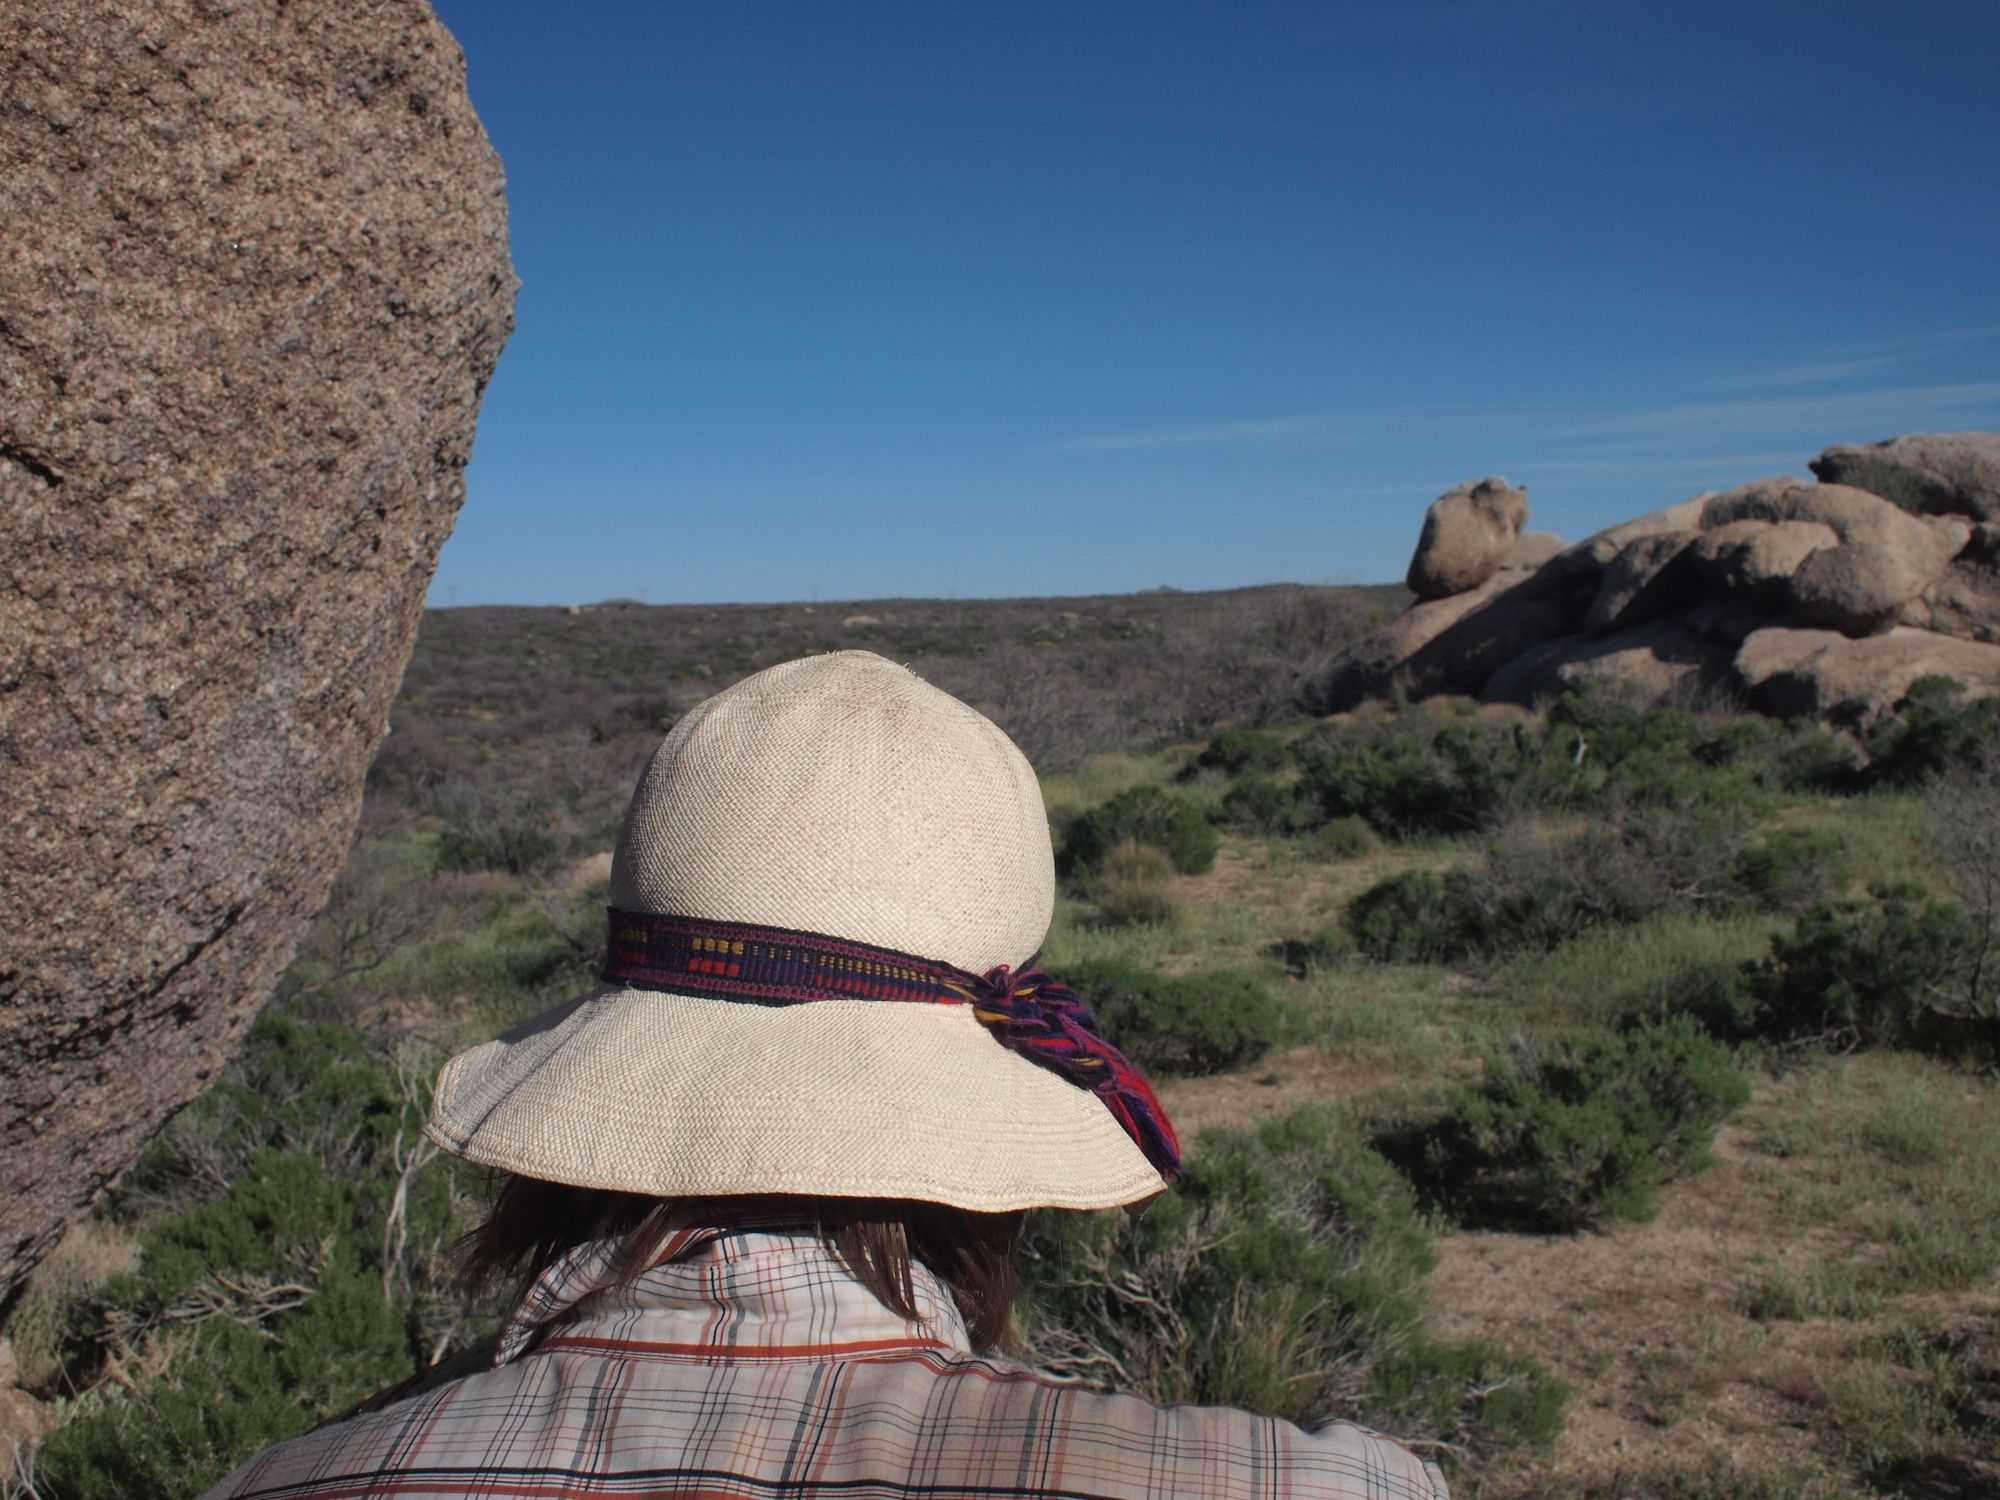 A man faces away from the camera wearing a white straw hat with purple, yellow and red band. He is walking through a desert landscape with large boulders. 